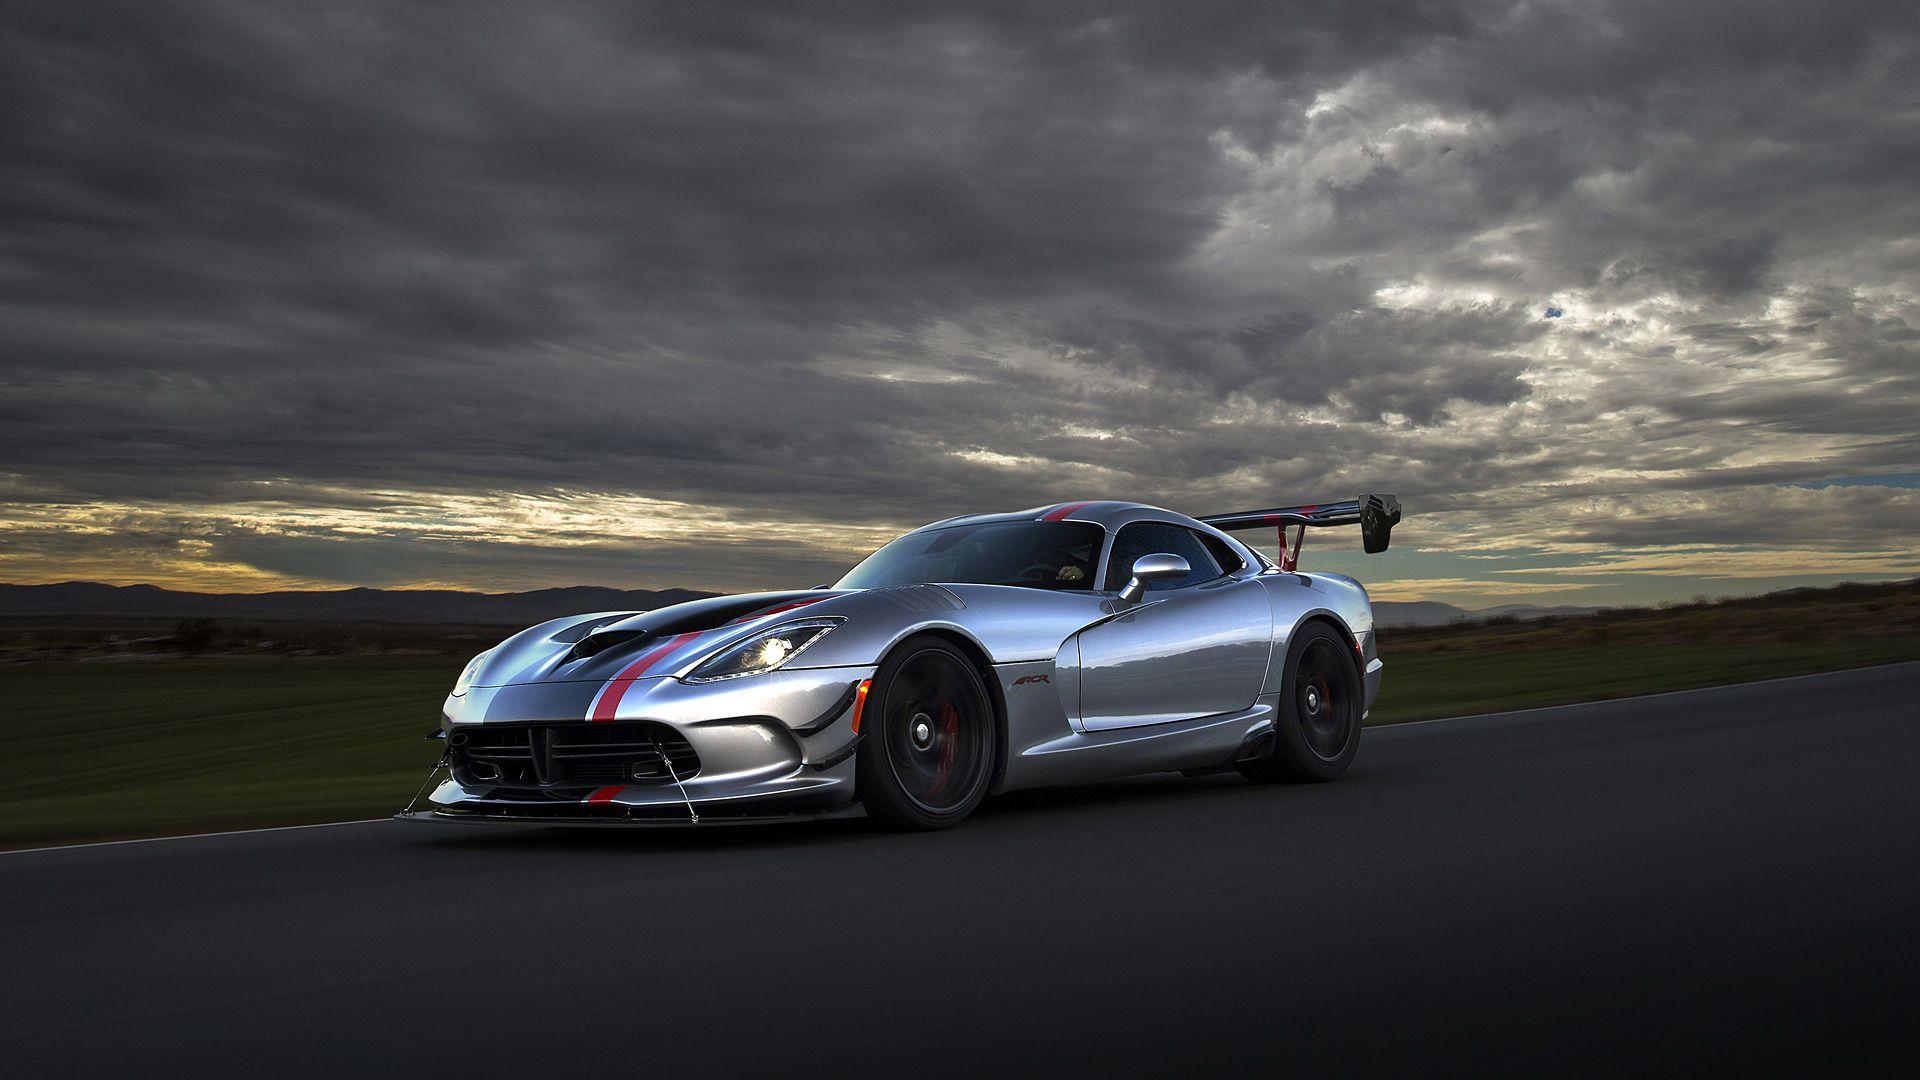 Dodge Viper Acr Wallpapers Top Free Dodge Viper Acr Backgrounds Wallpaperaccess